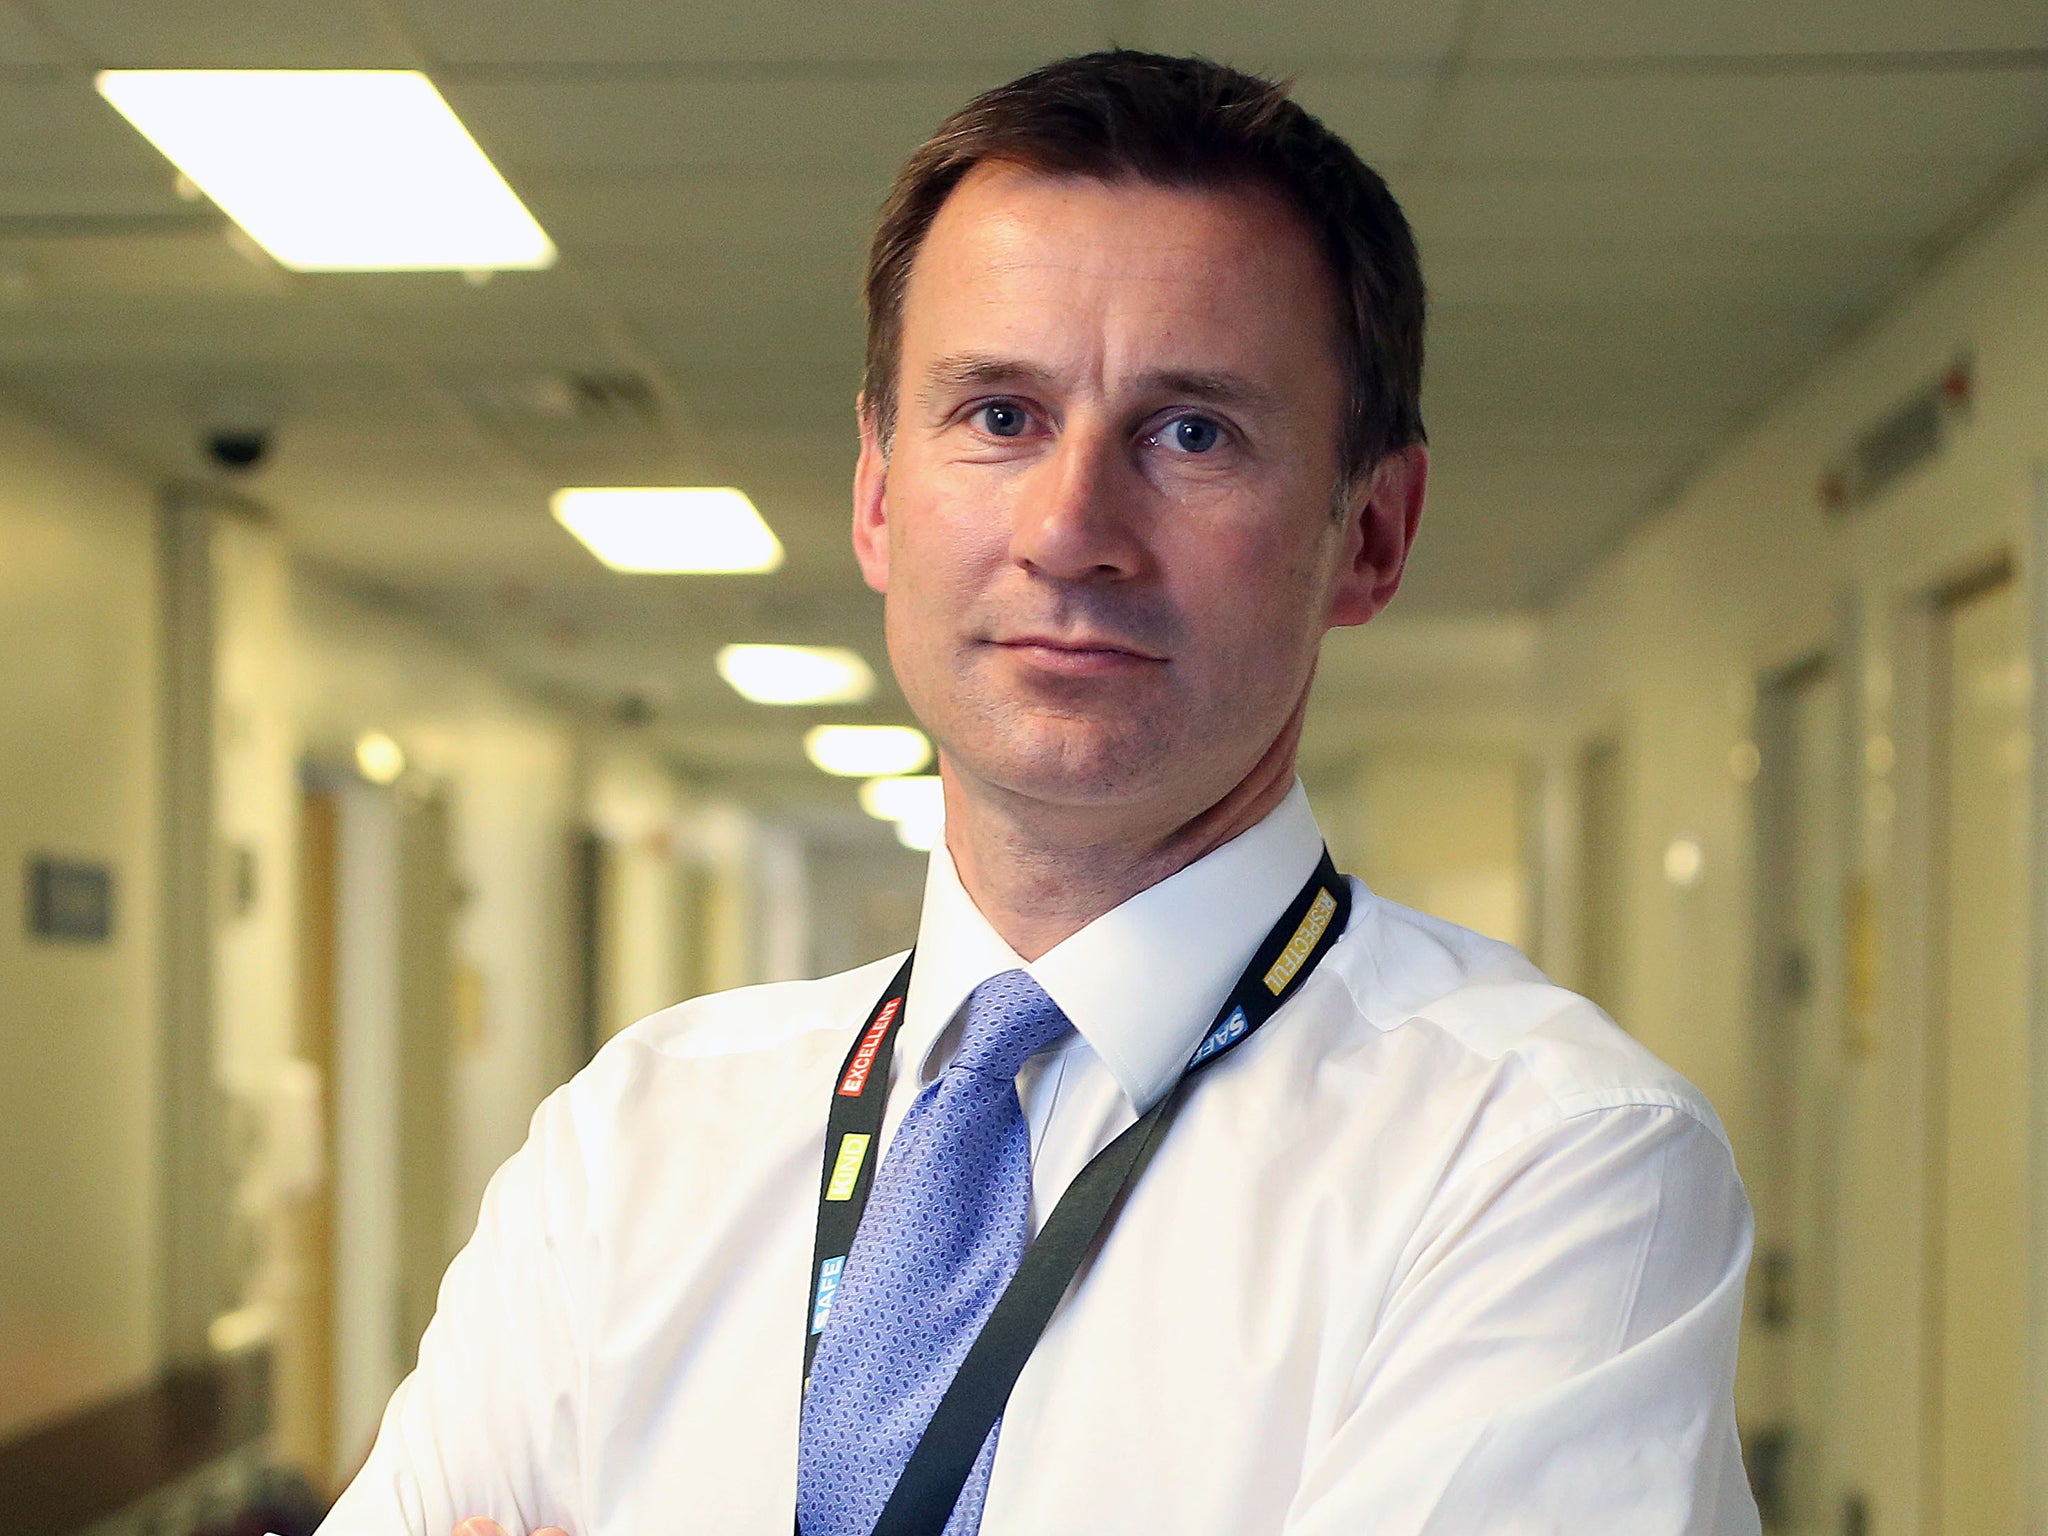 Health Secretary Jeremy Hunt, who ordered the inquiry, said at the time that the principal concern was to find answers for families as to what went “desperately wrong” with care received and to ensure no repeat